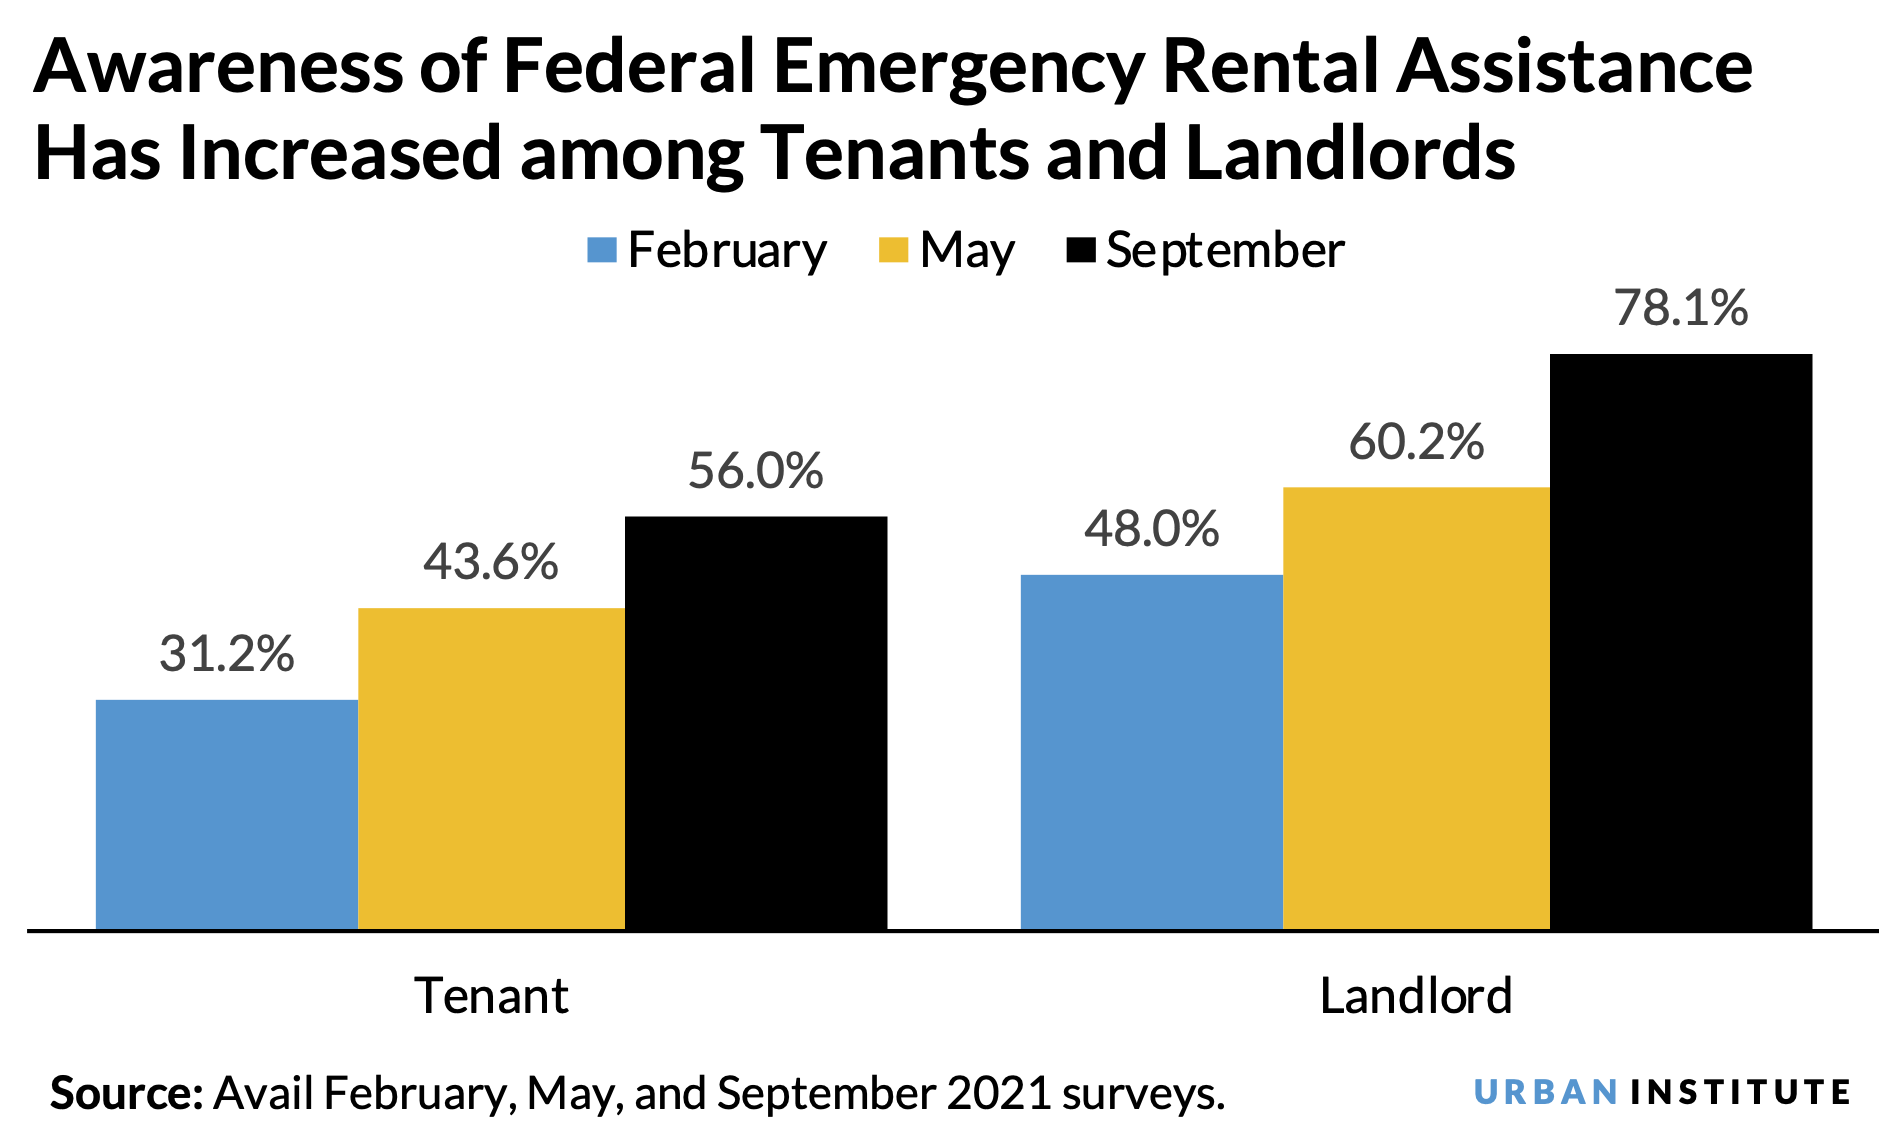 Vertical bar chart showing that awareness of federal emergency rental assistance has increased among landlords and tenants from February to September 2021